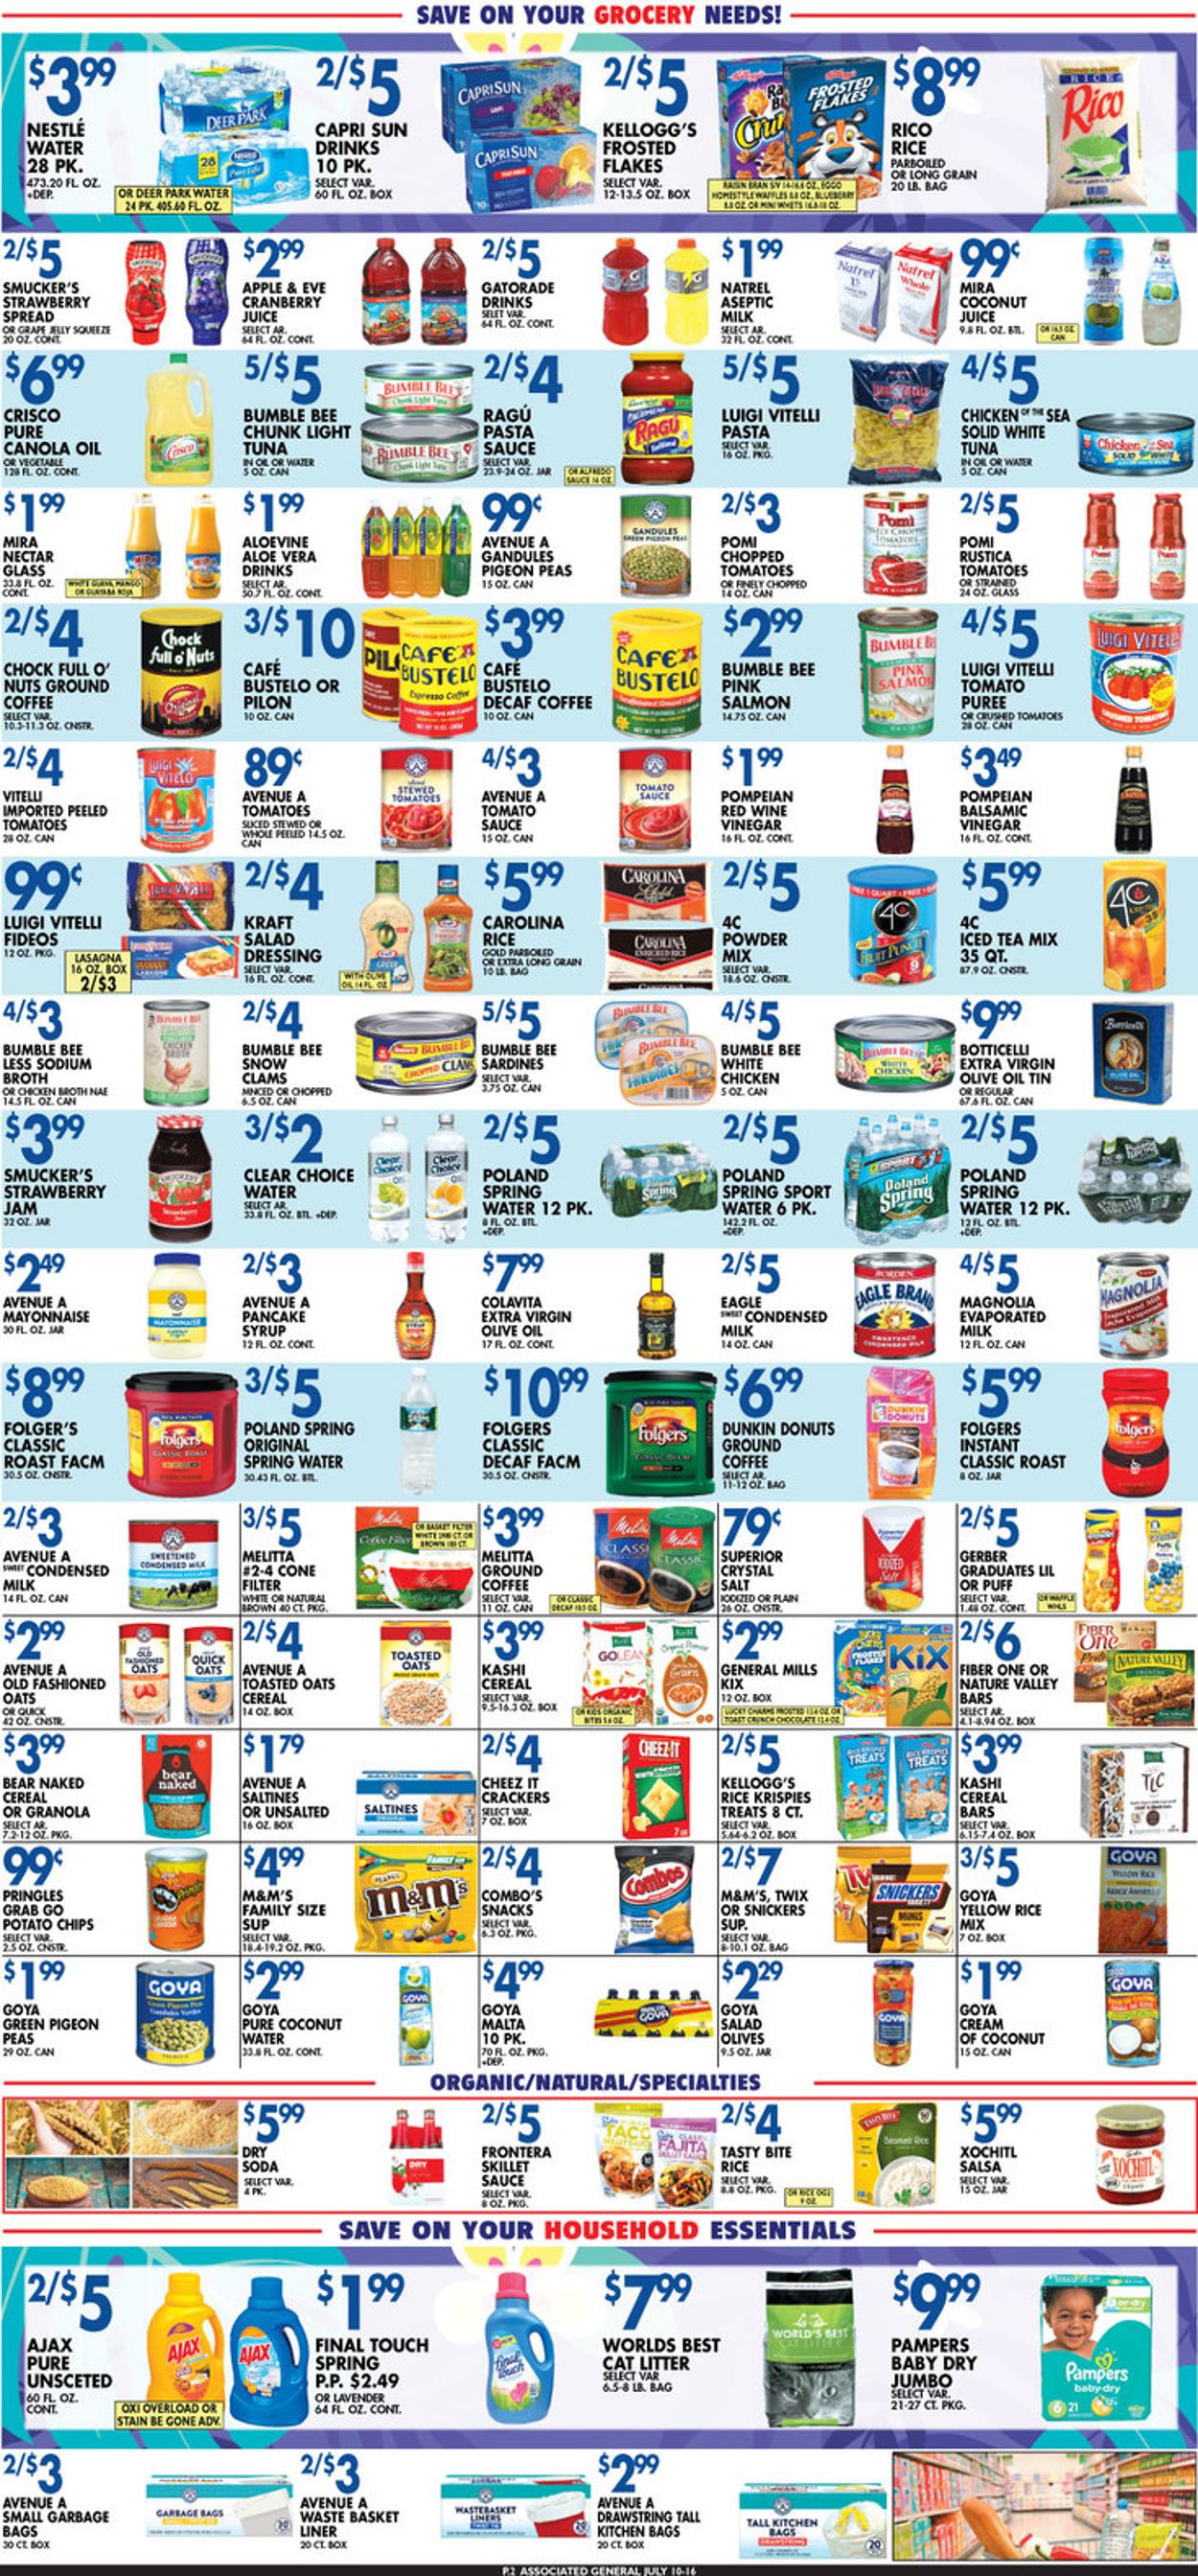 Associated Supermarkets Ad from 07/10/2020